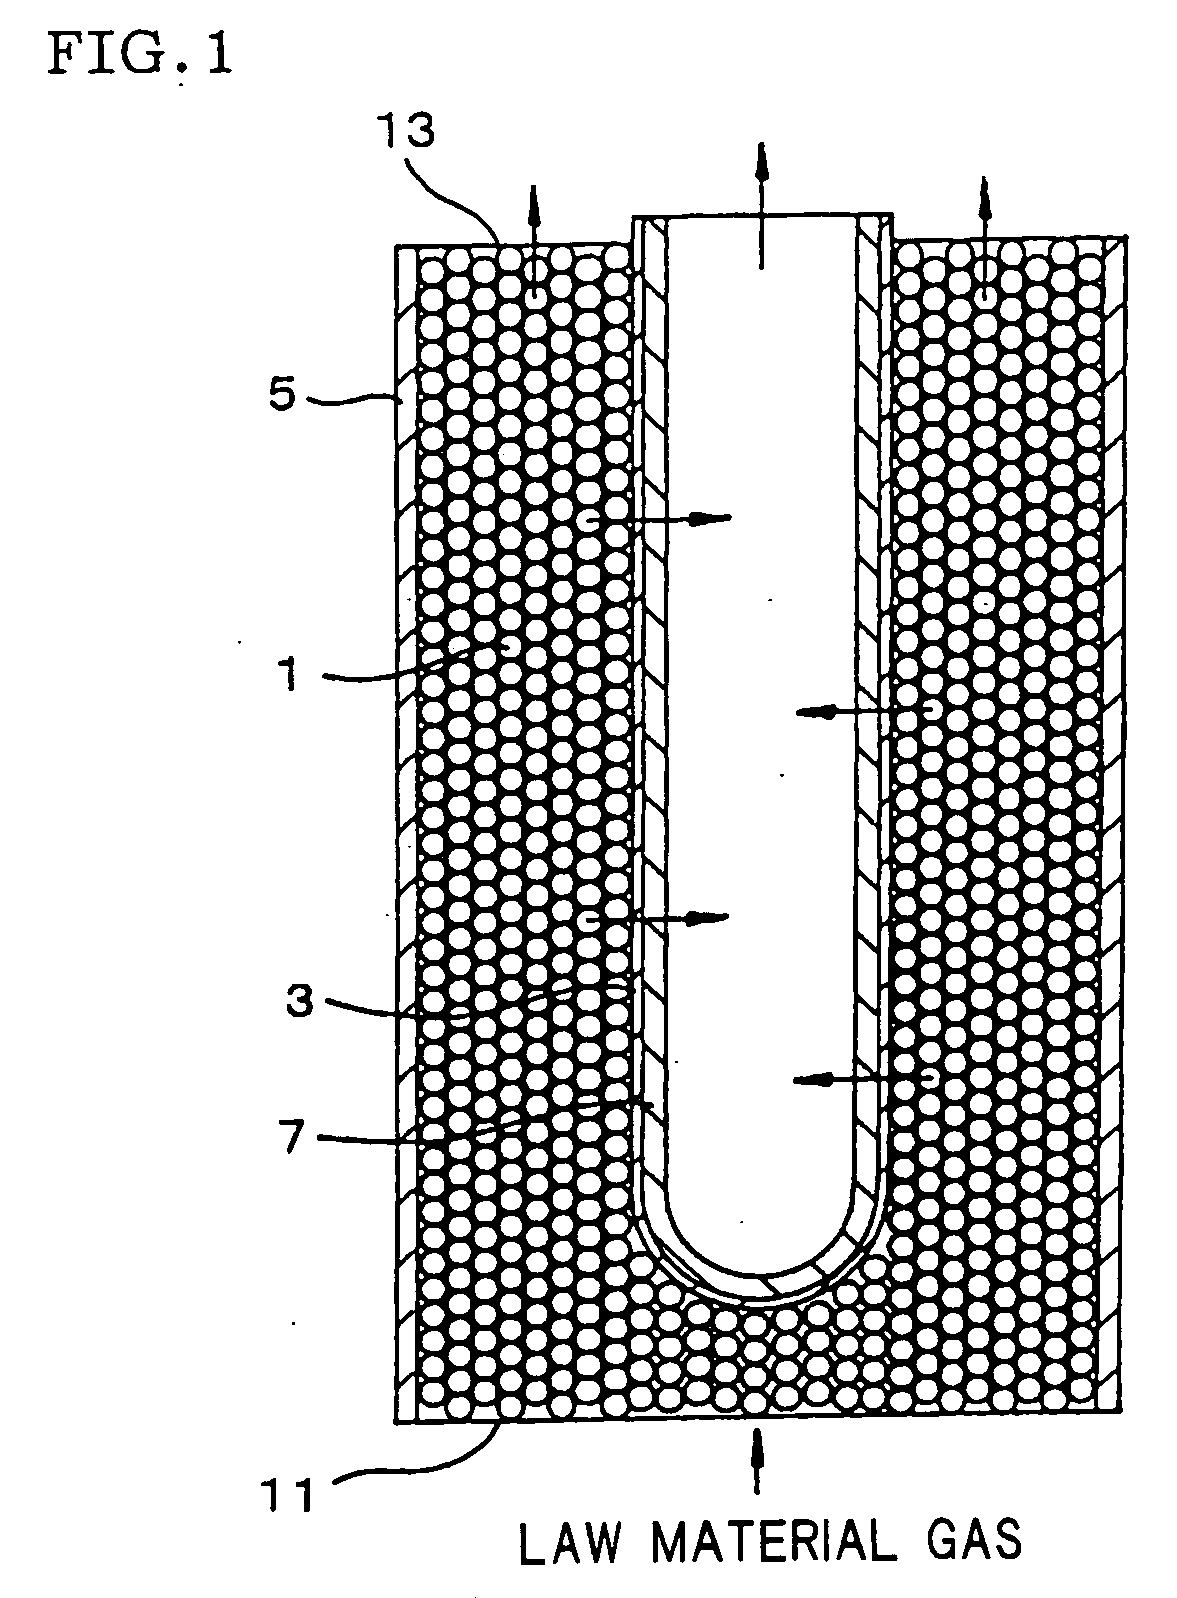 Process for reforming hydrocarbons with carbon dioxide by the use of a selectively permeable membrane reactor